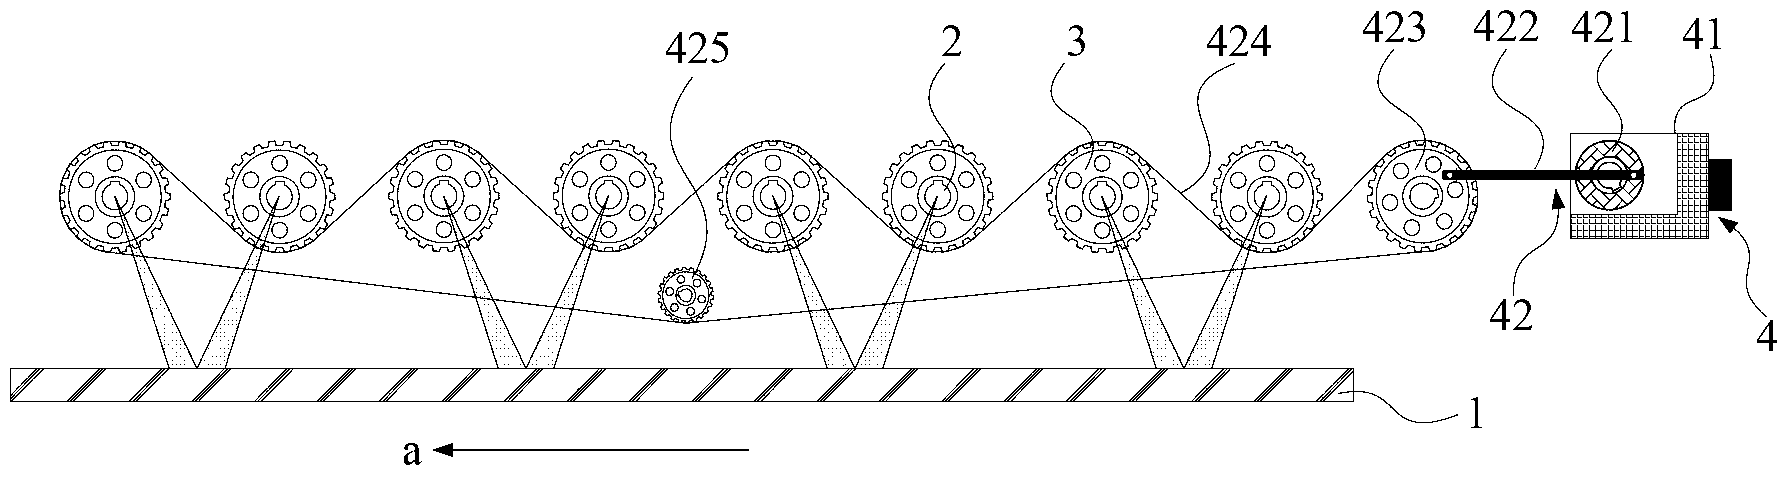 Substrate cleaning device